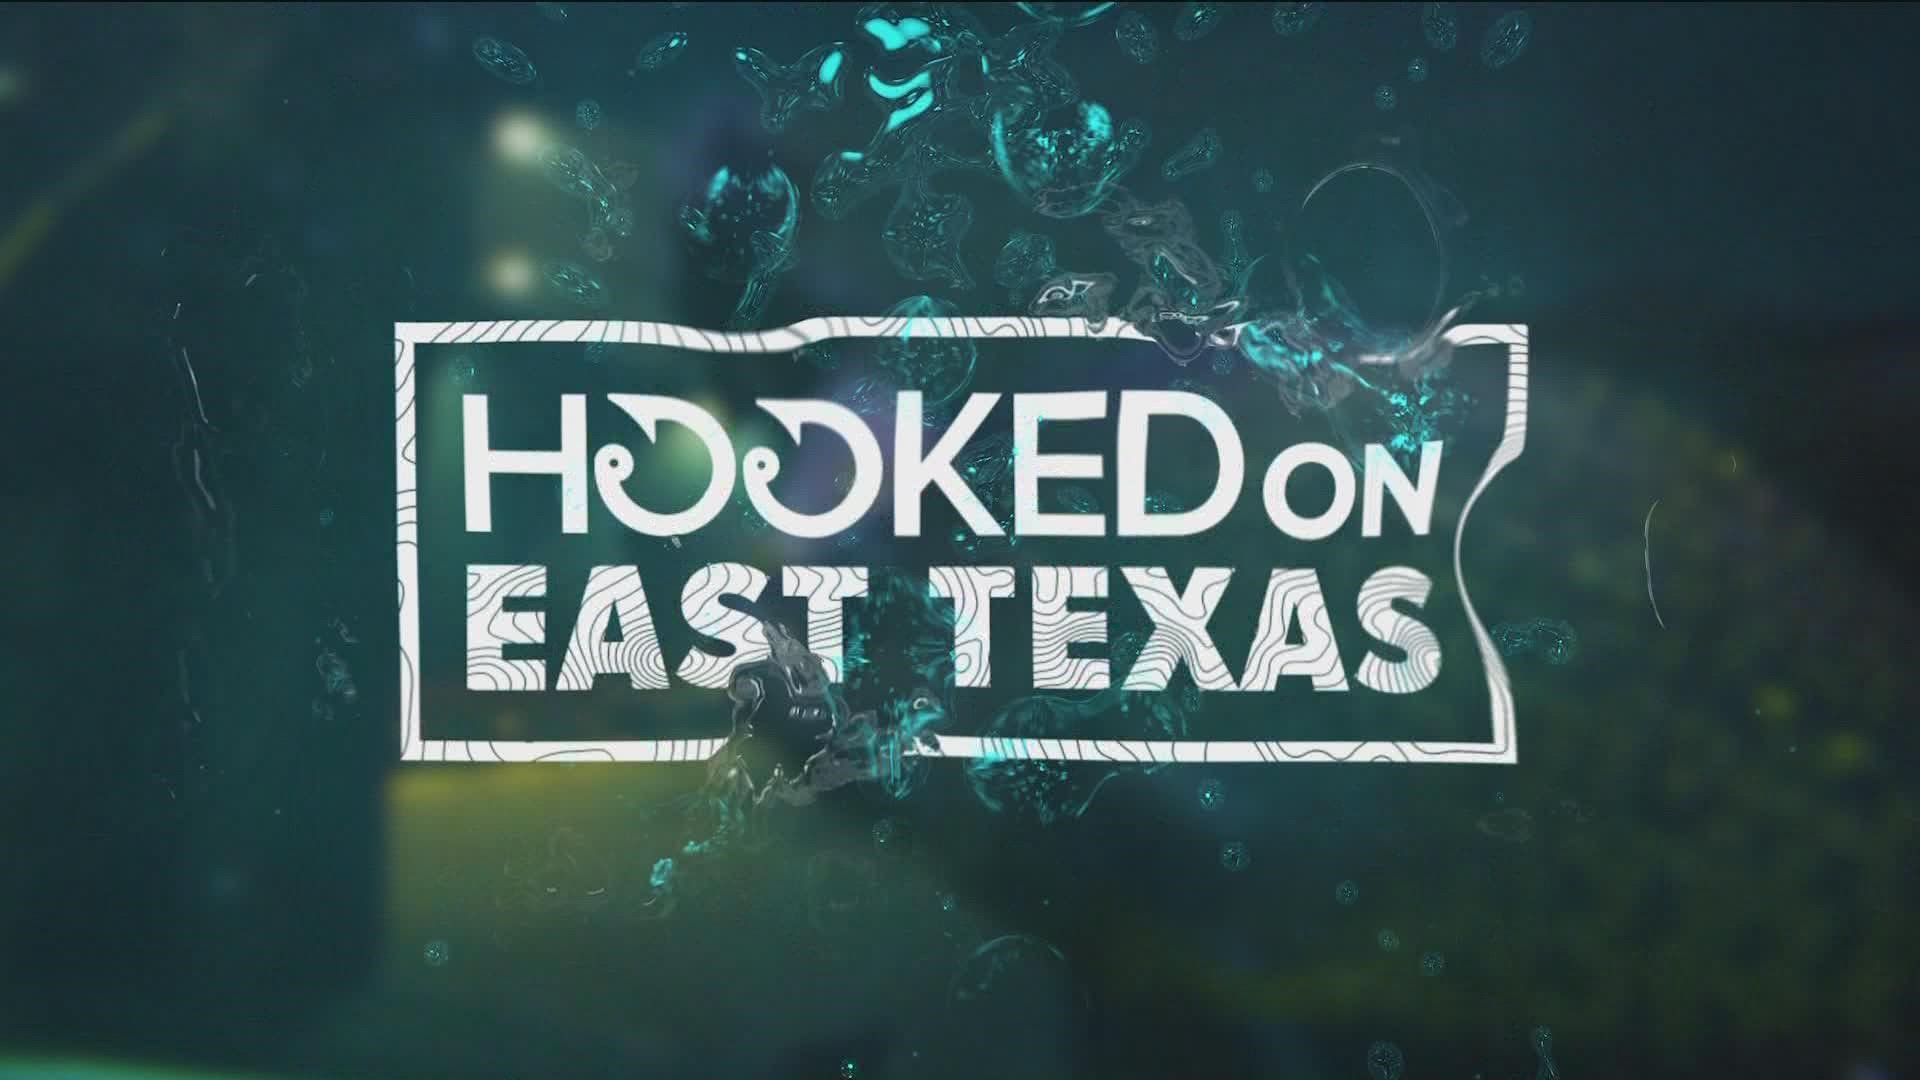 For more Hooked On East Texas stories visit, cbs.19.tv/hooked-on-east-texas